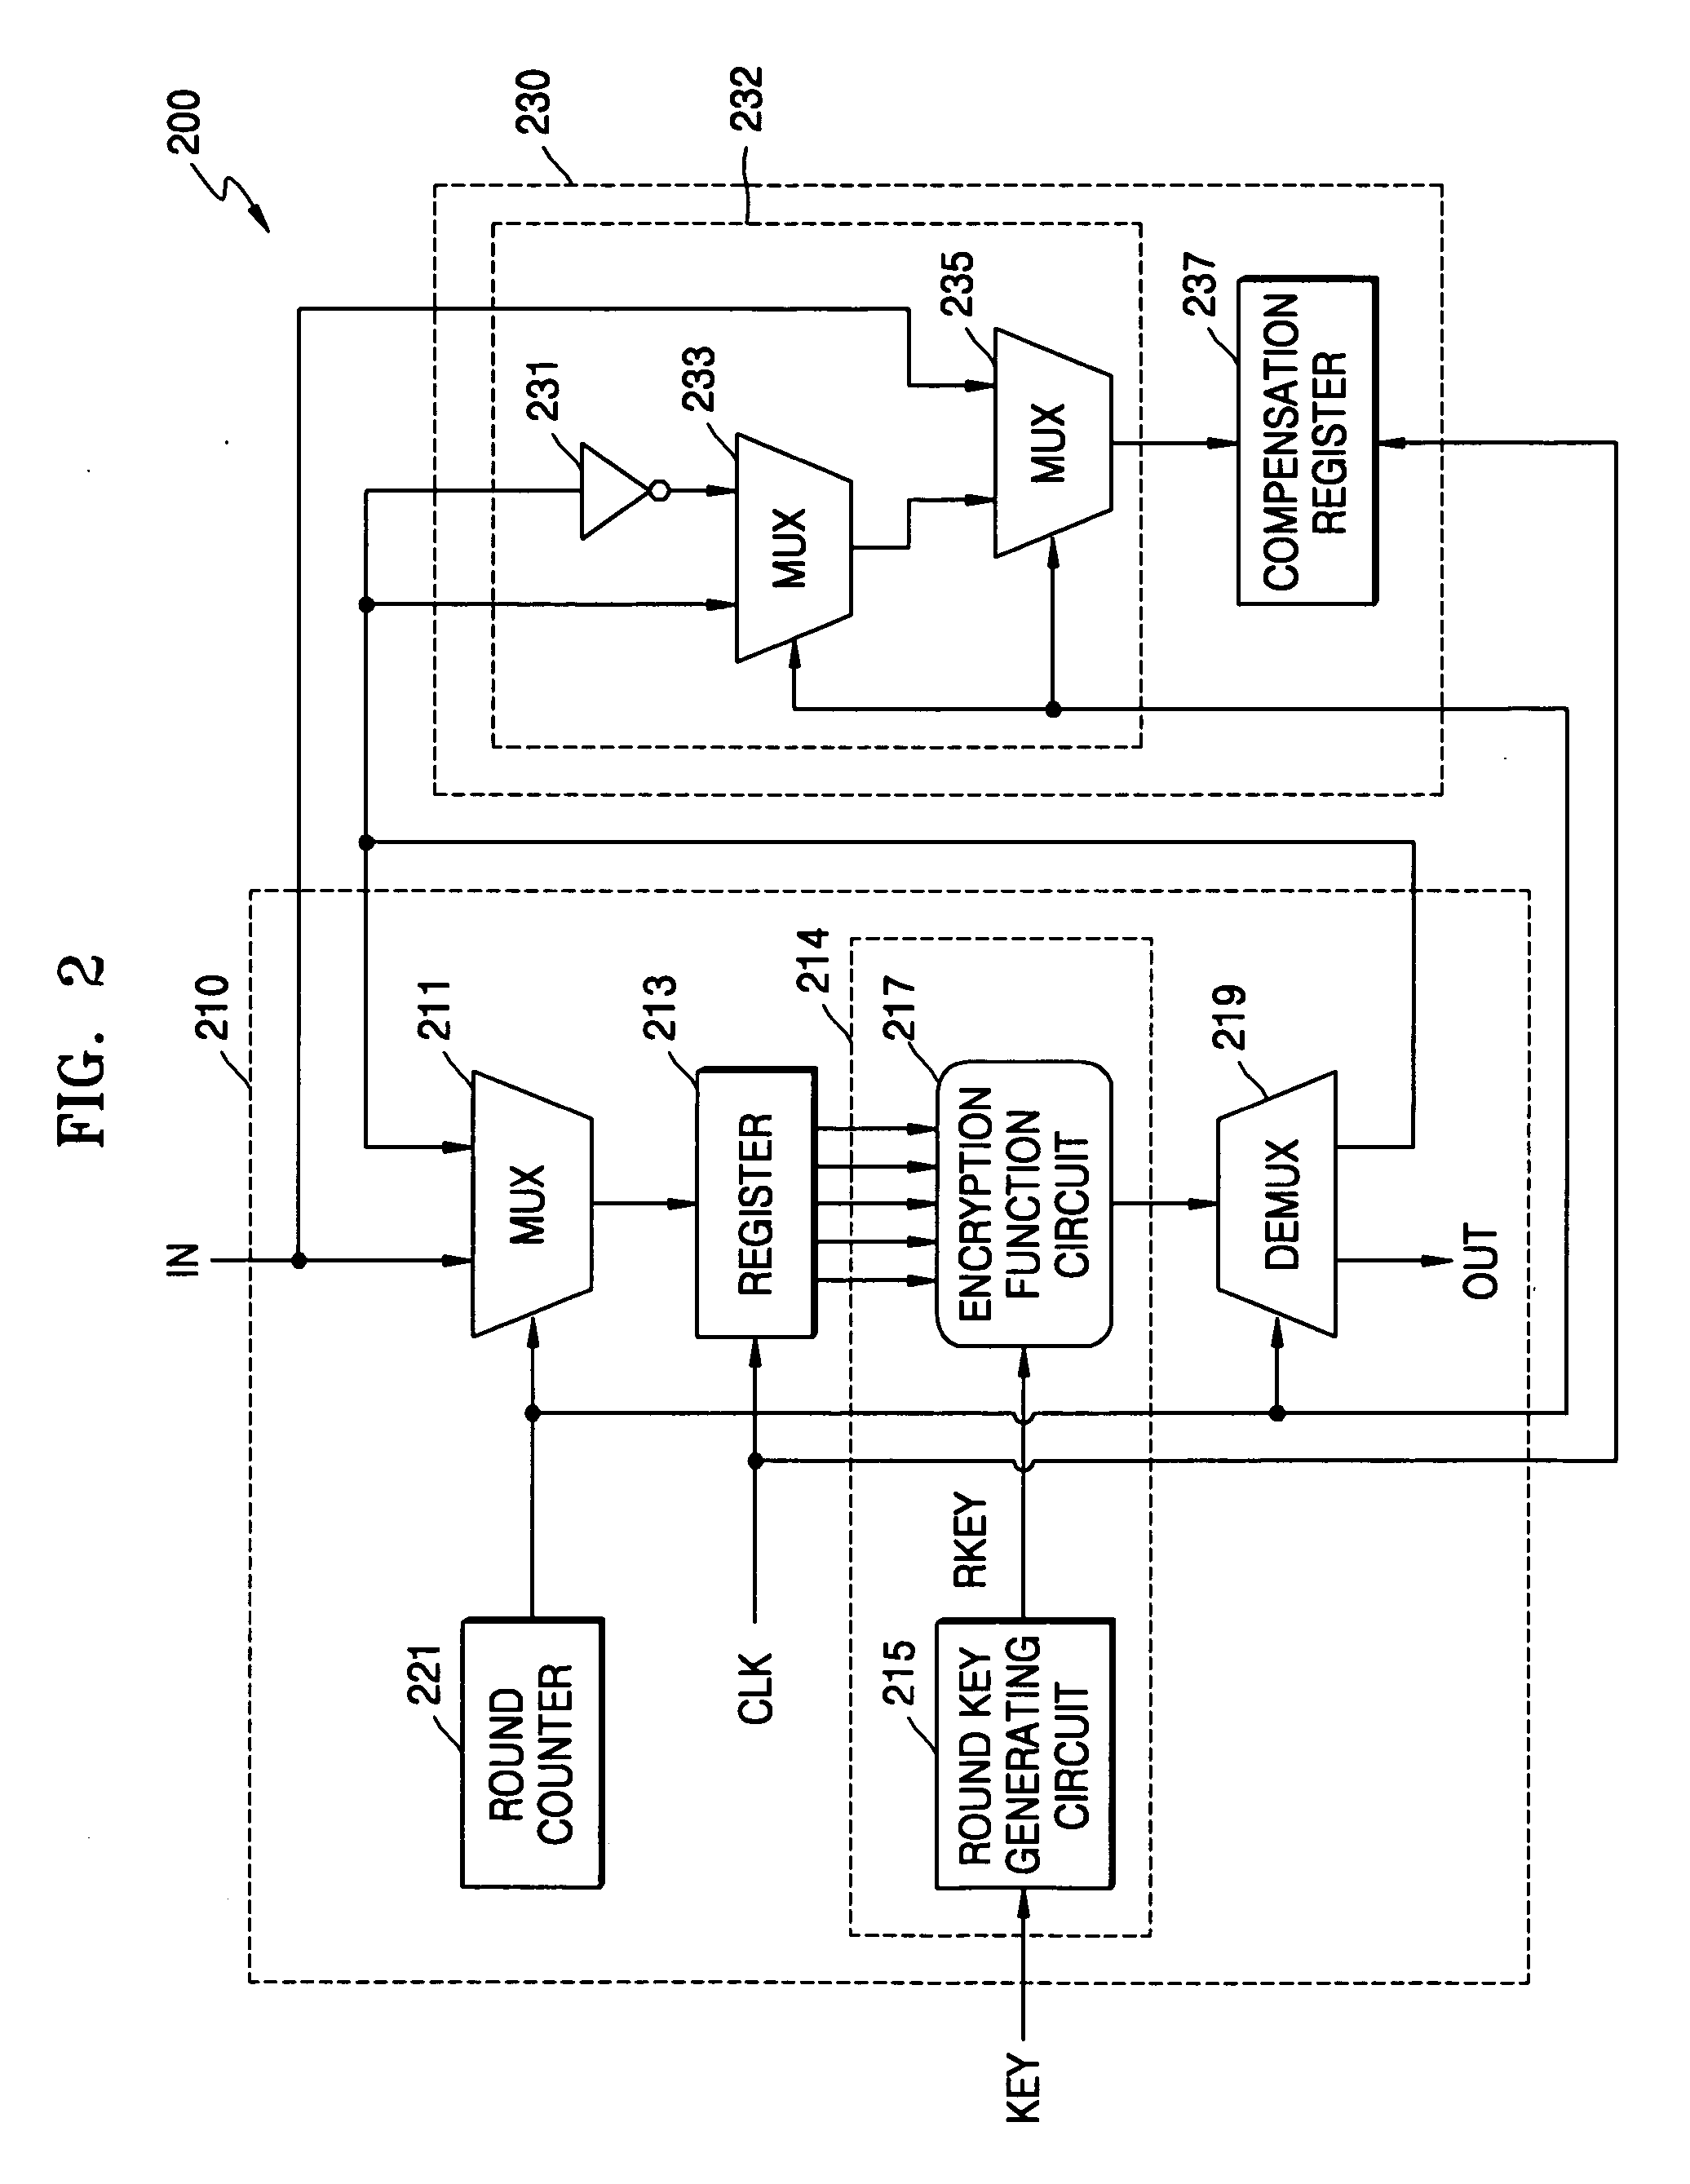 Cryptographic system and method for encrypting input data